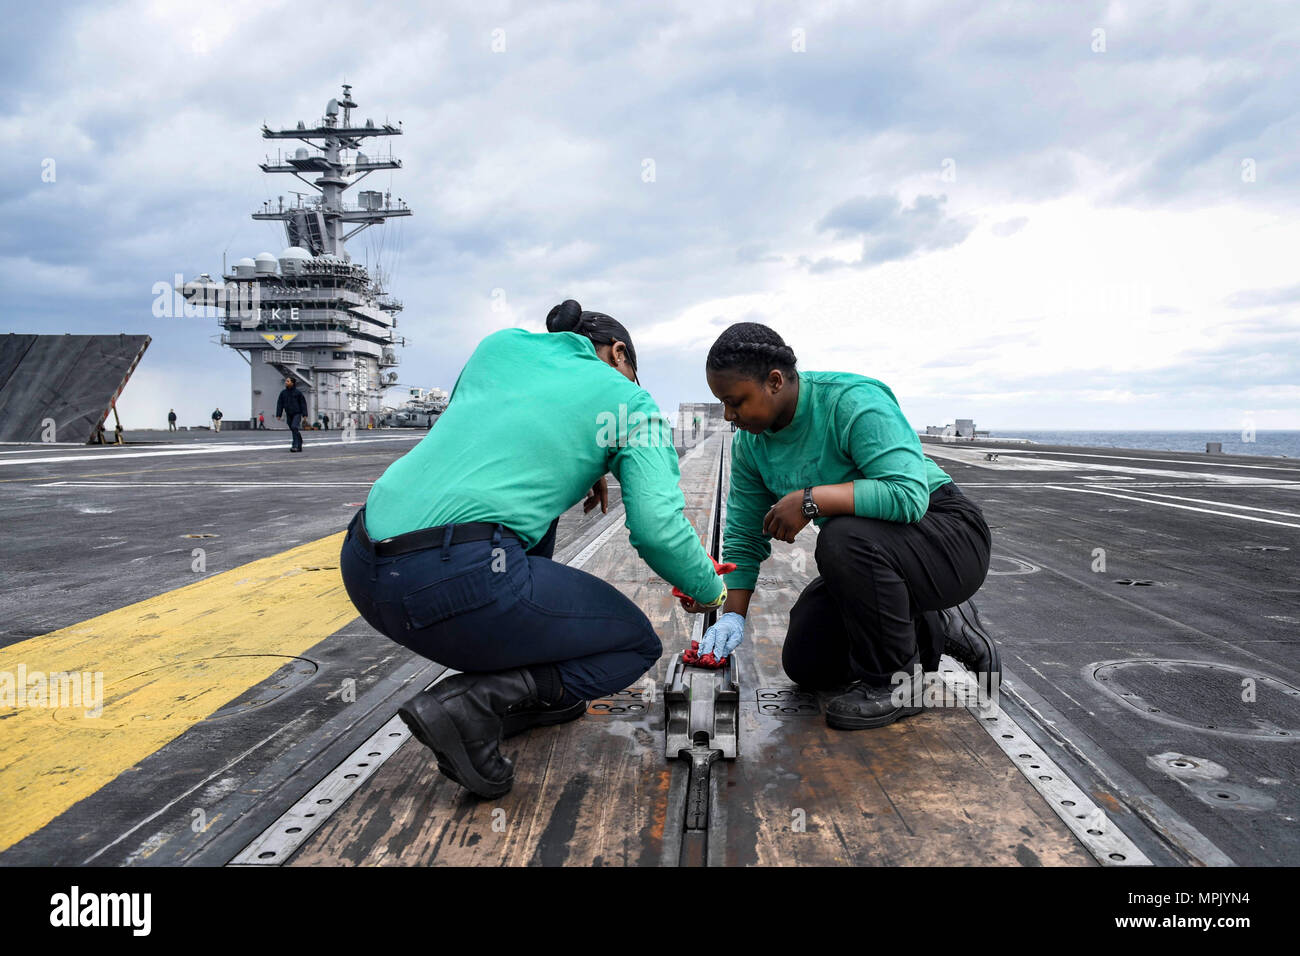 170318-N-IE397-022    ATLANTIC OCEAN (March 18, 2017) Aviation Boatswain's Mate (Equipment) Airman Wanda Ingram, from Dallas, left, and Airman Paige Boyd, from New Orleans, conduct maintenance on a steam-powered catapult on the flight deck of the aircraft carrier USS Dwight D. Eisenhower (CVN 69) (Ike). Ike is currently conducting aircraft carrier qualifications during the sustainment phase of the Optimized Fleet Response Plan (OFRP). (U.S. Navy photo by Mass Communication Specialist 3rd Class Christopher A. Michaels) Stock Photo